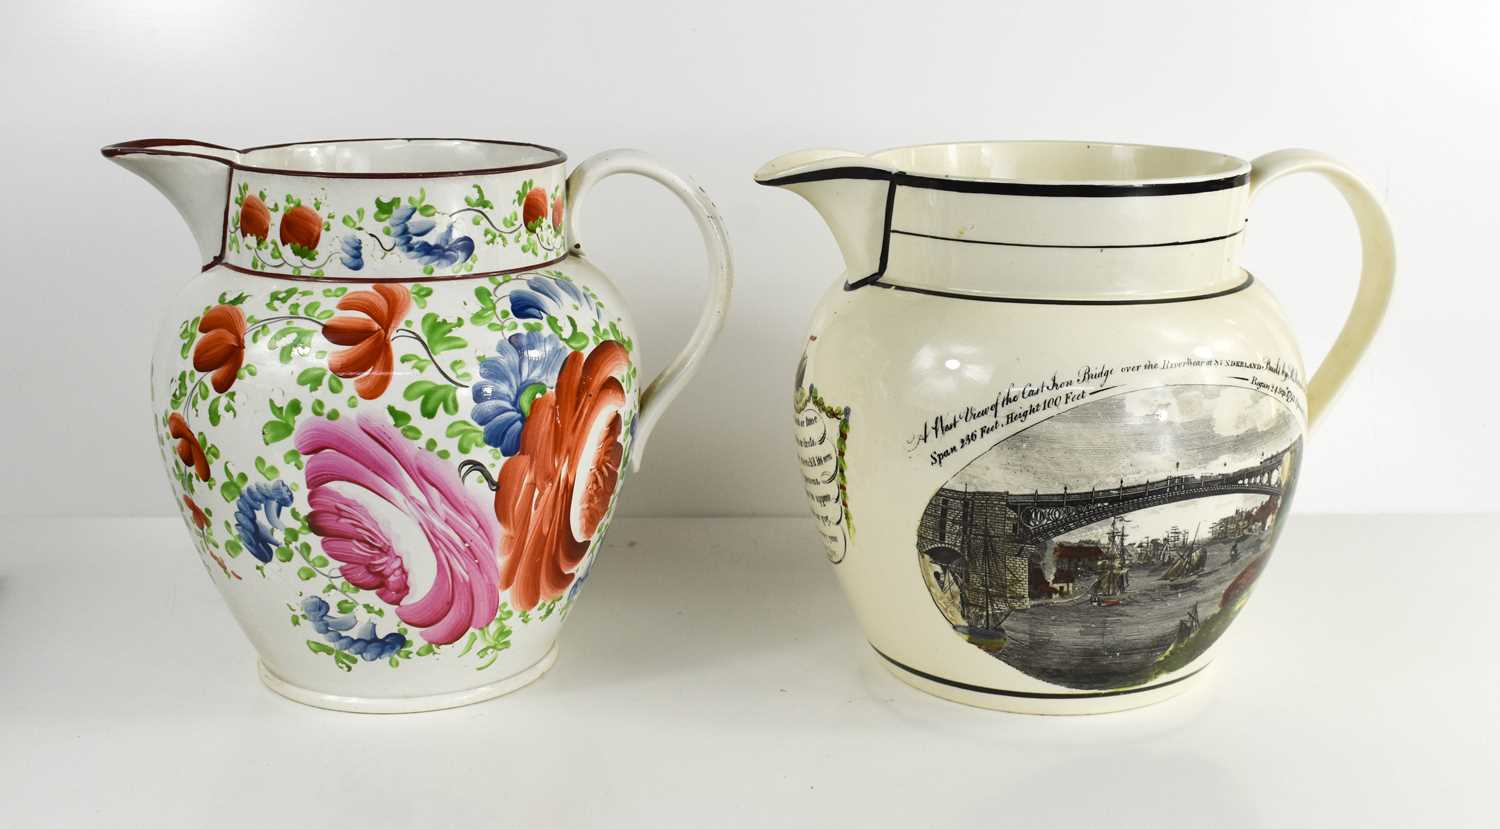 A 19th century Sunderland water jug, signed Phillips & Co, with a Lords Statement decorated with